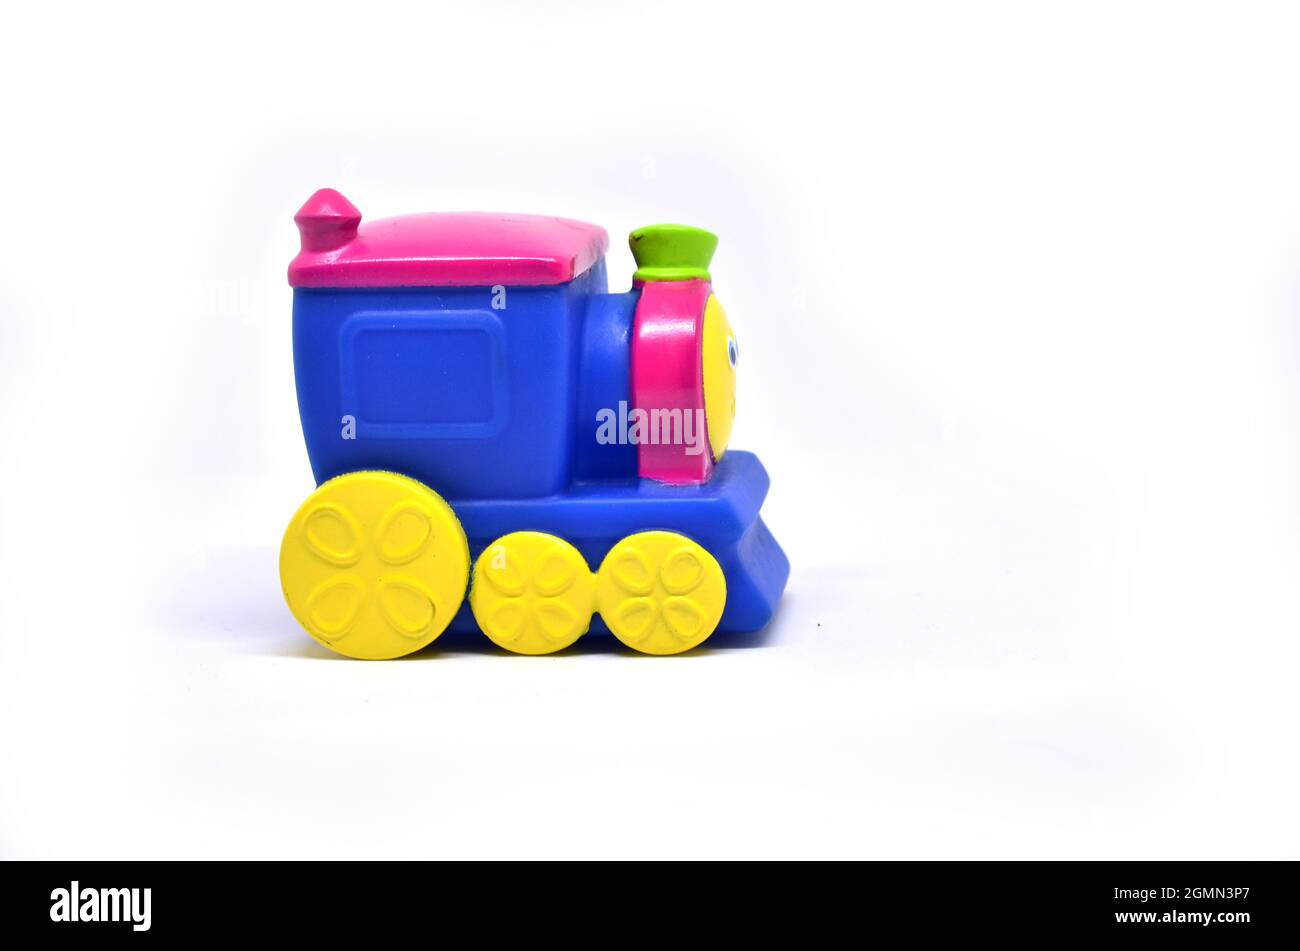 Colorful toy train for children isolated on white background Stock Photo